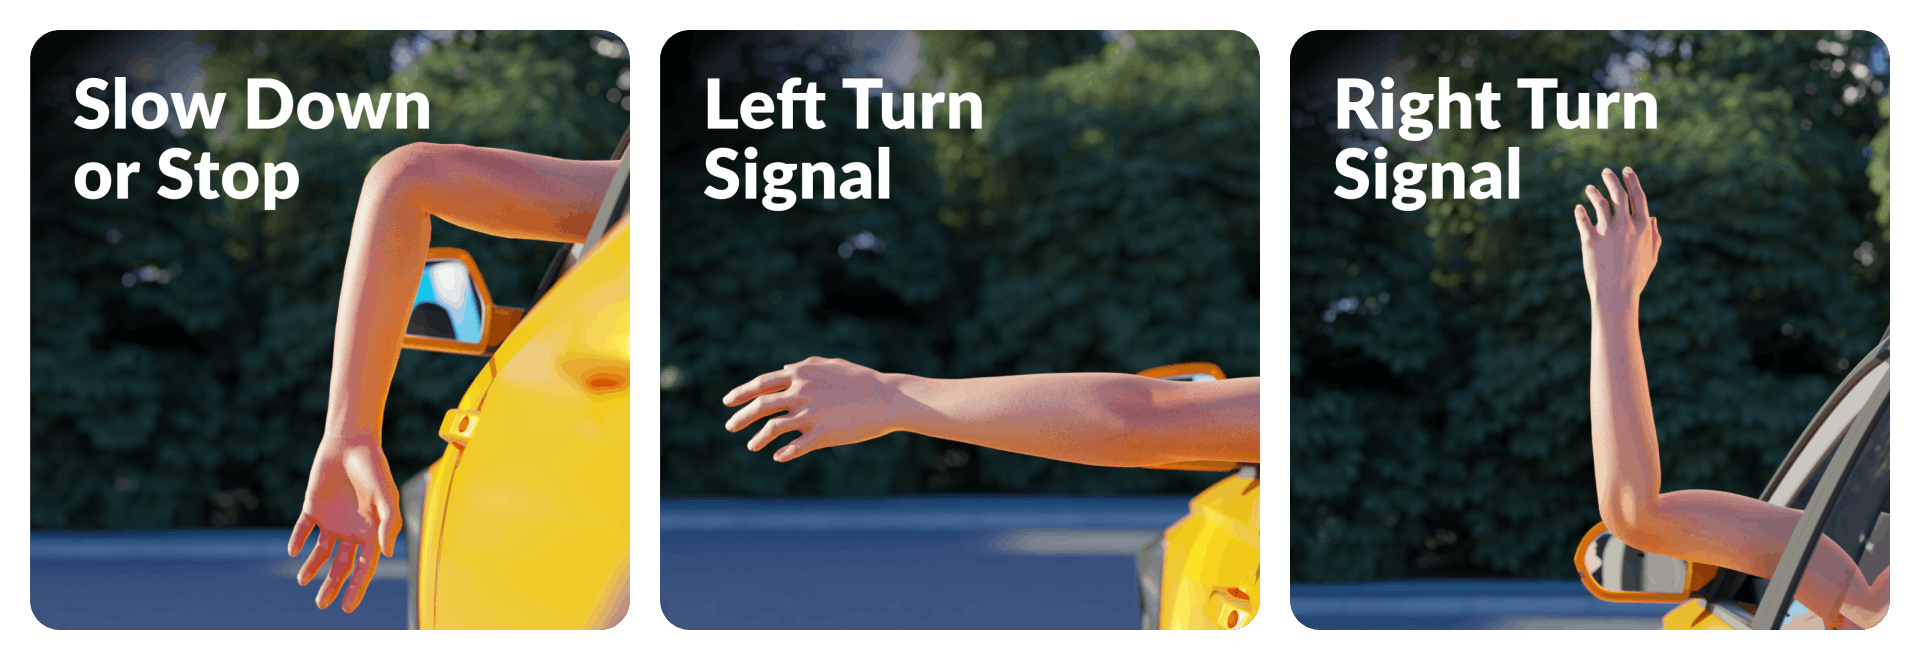 Hand Signals for the Driving Test